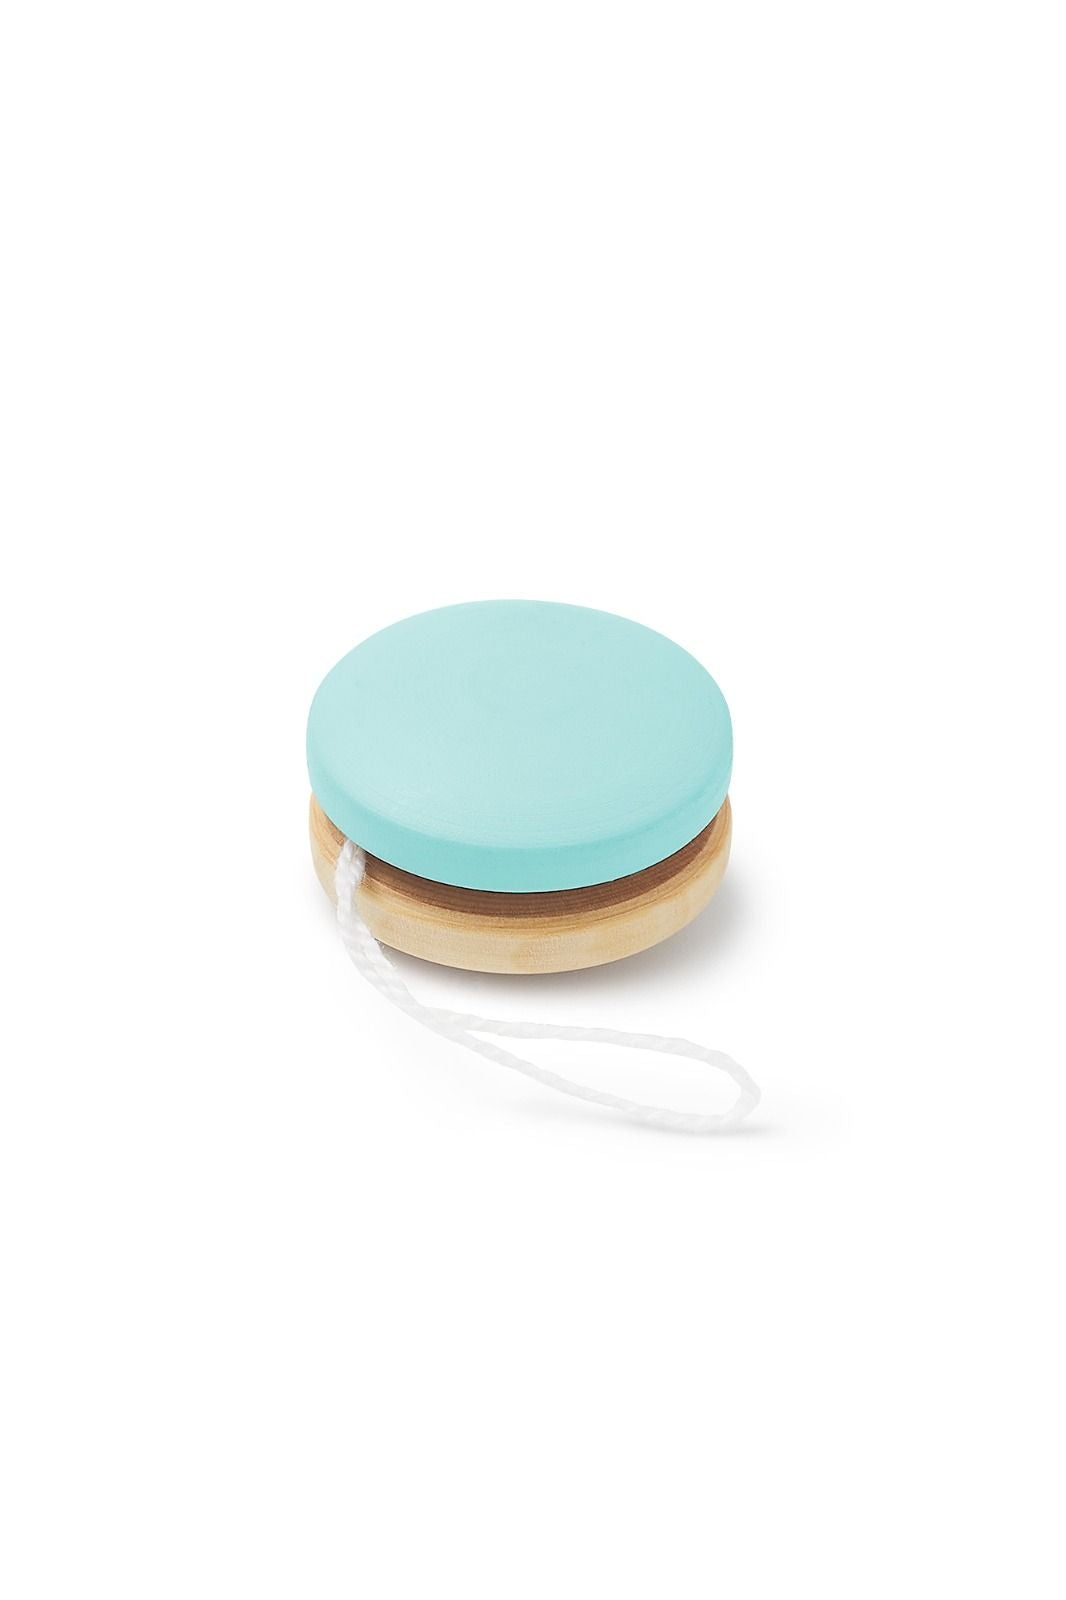 Mini Wooden YoYo - Eco-friendly and entertaining toy for sustainable and nostalgic play